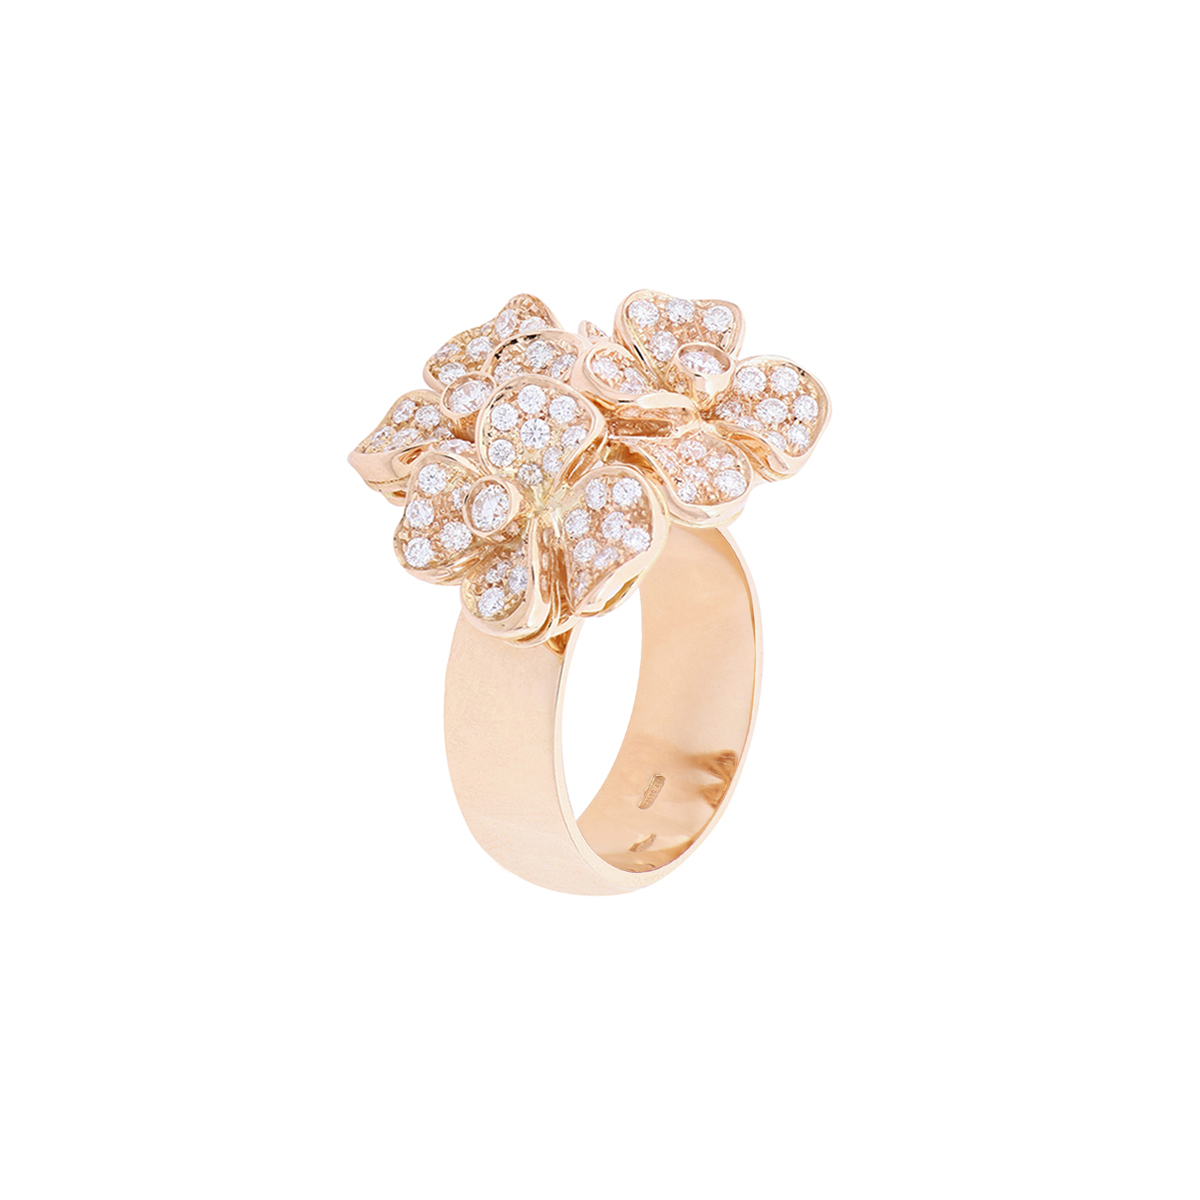 Red Gold Diamond Flower Bouquet Ring